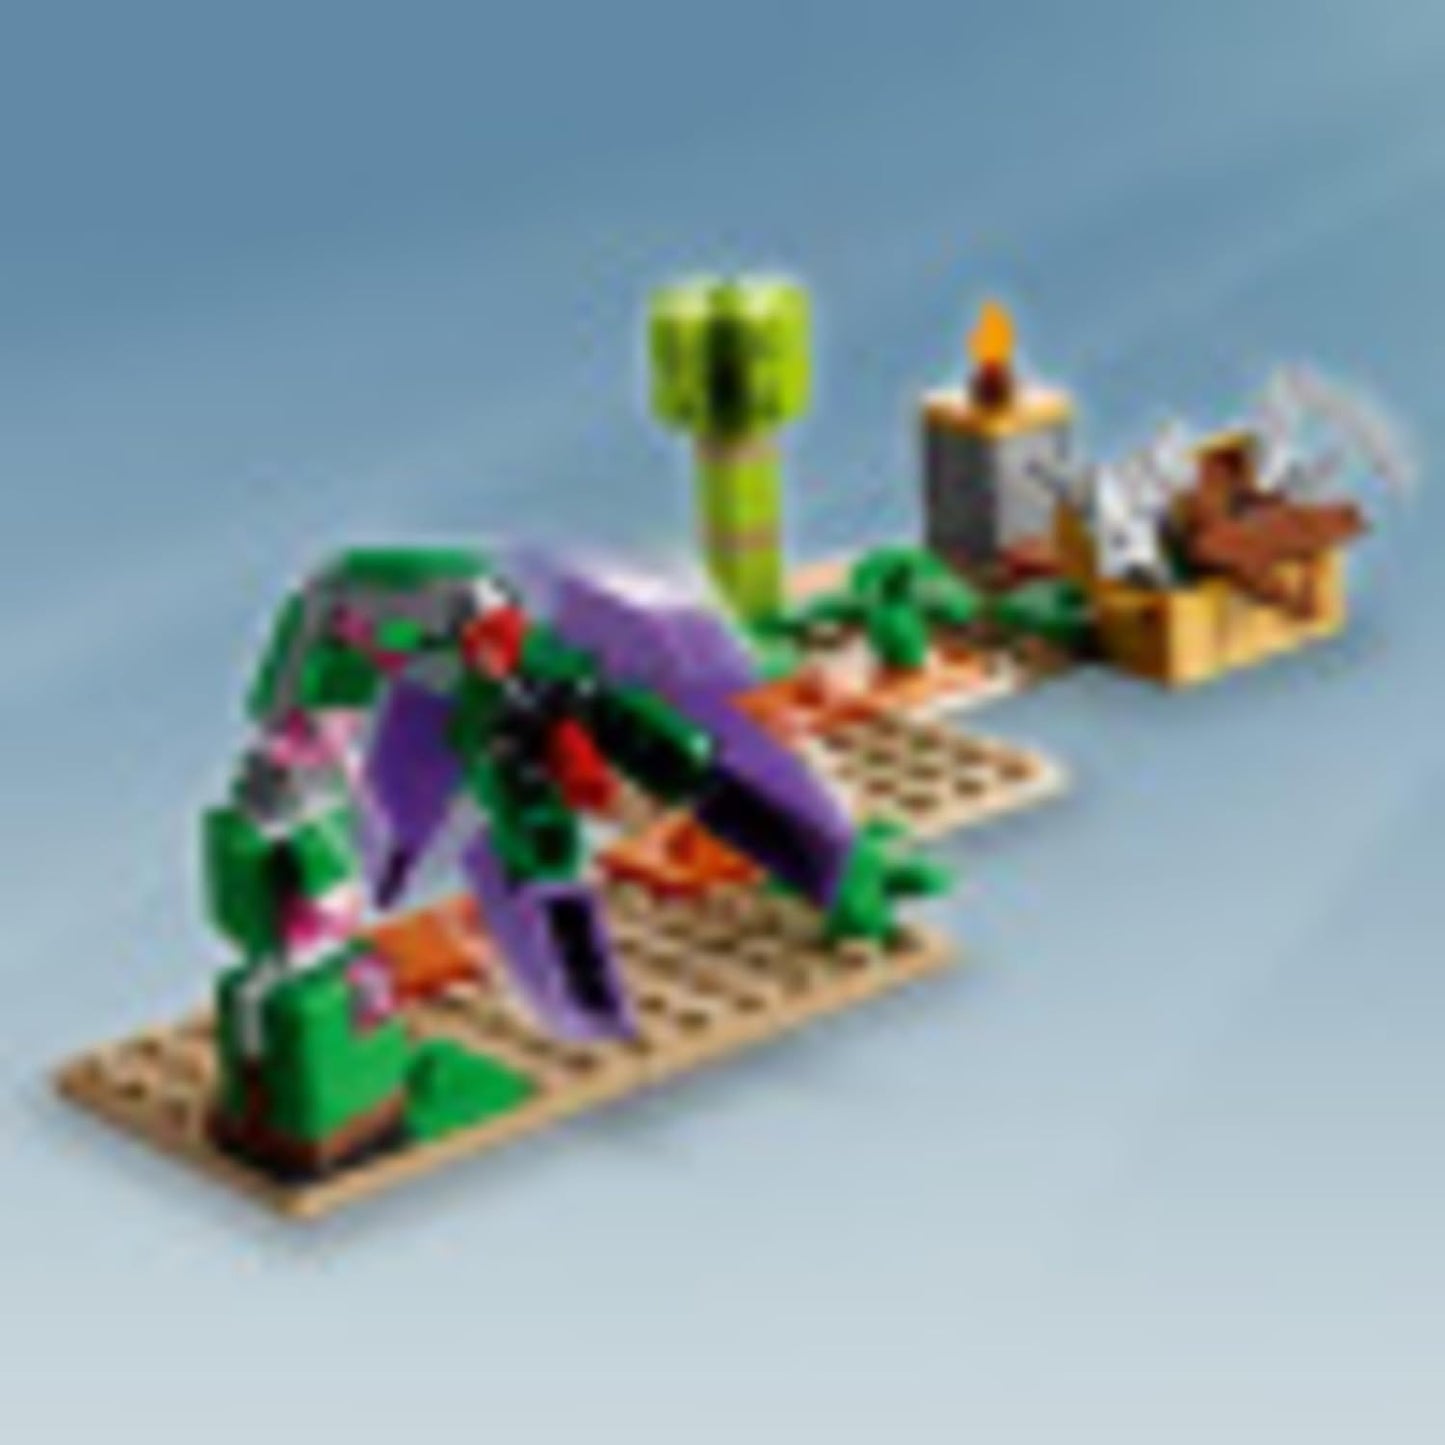 LEGO Minecraft The Jungle Abomination 21176 Building Kit Playset; Fun Minecraft Dungeons Exploring Toy for Kids; New 2021 (489 Pieces)